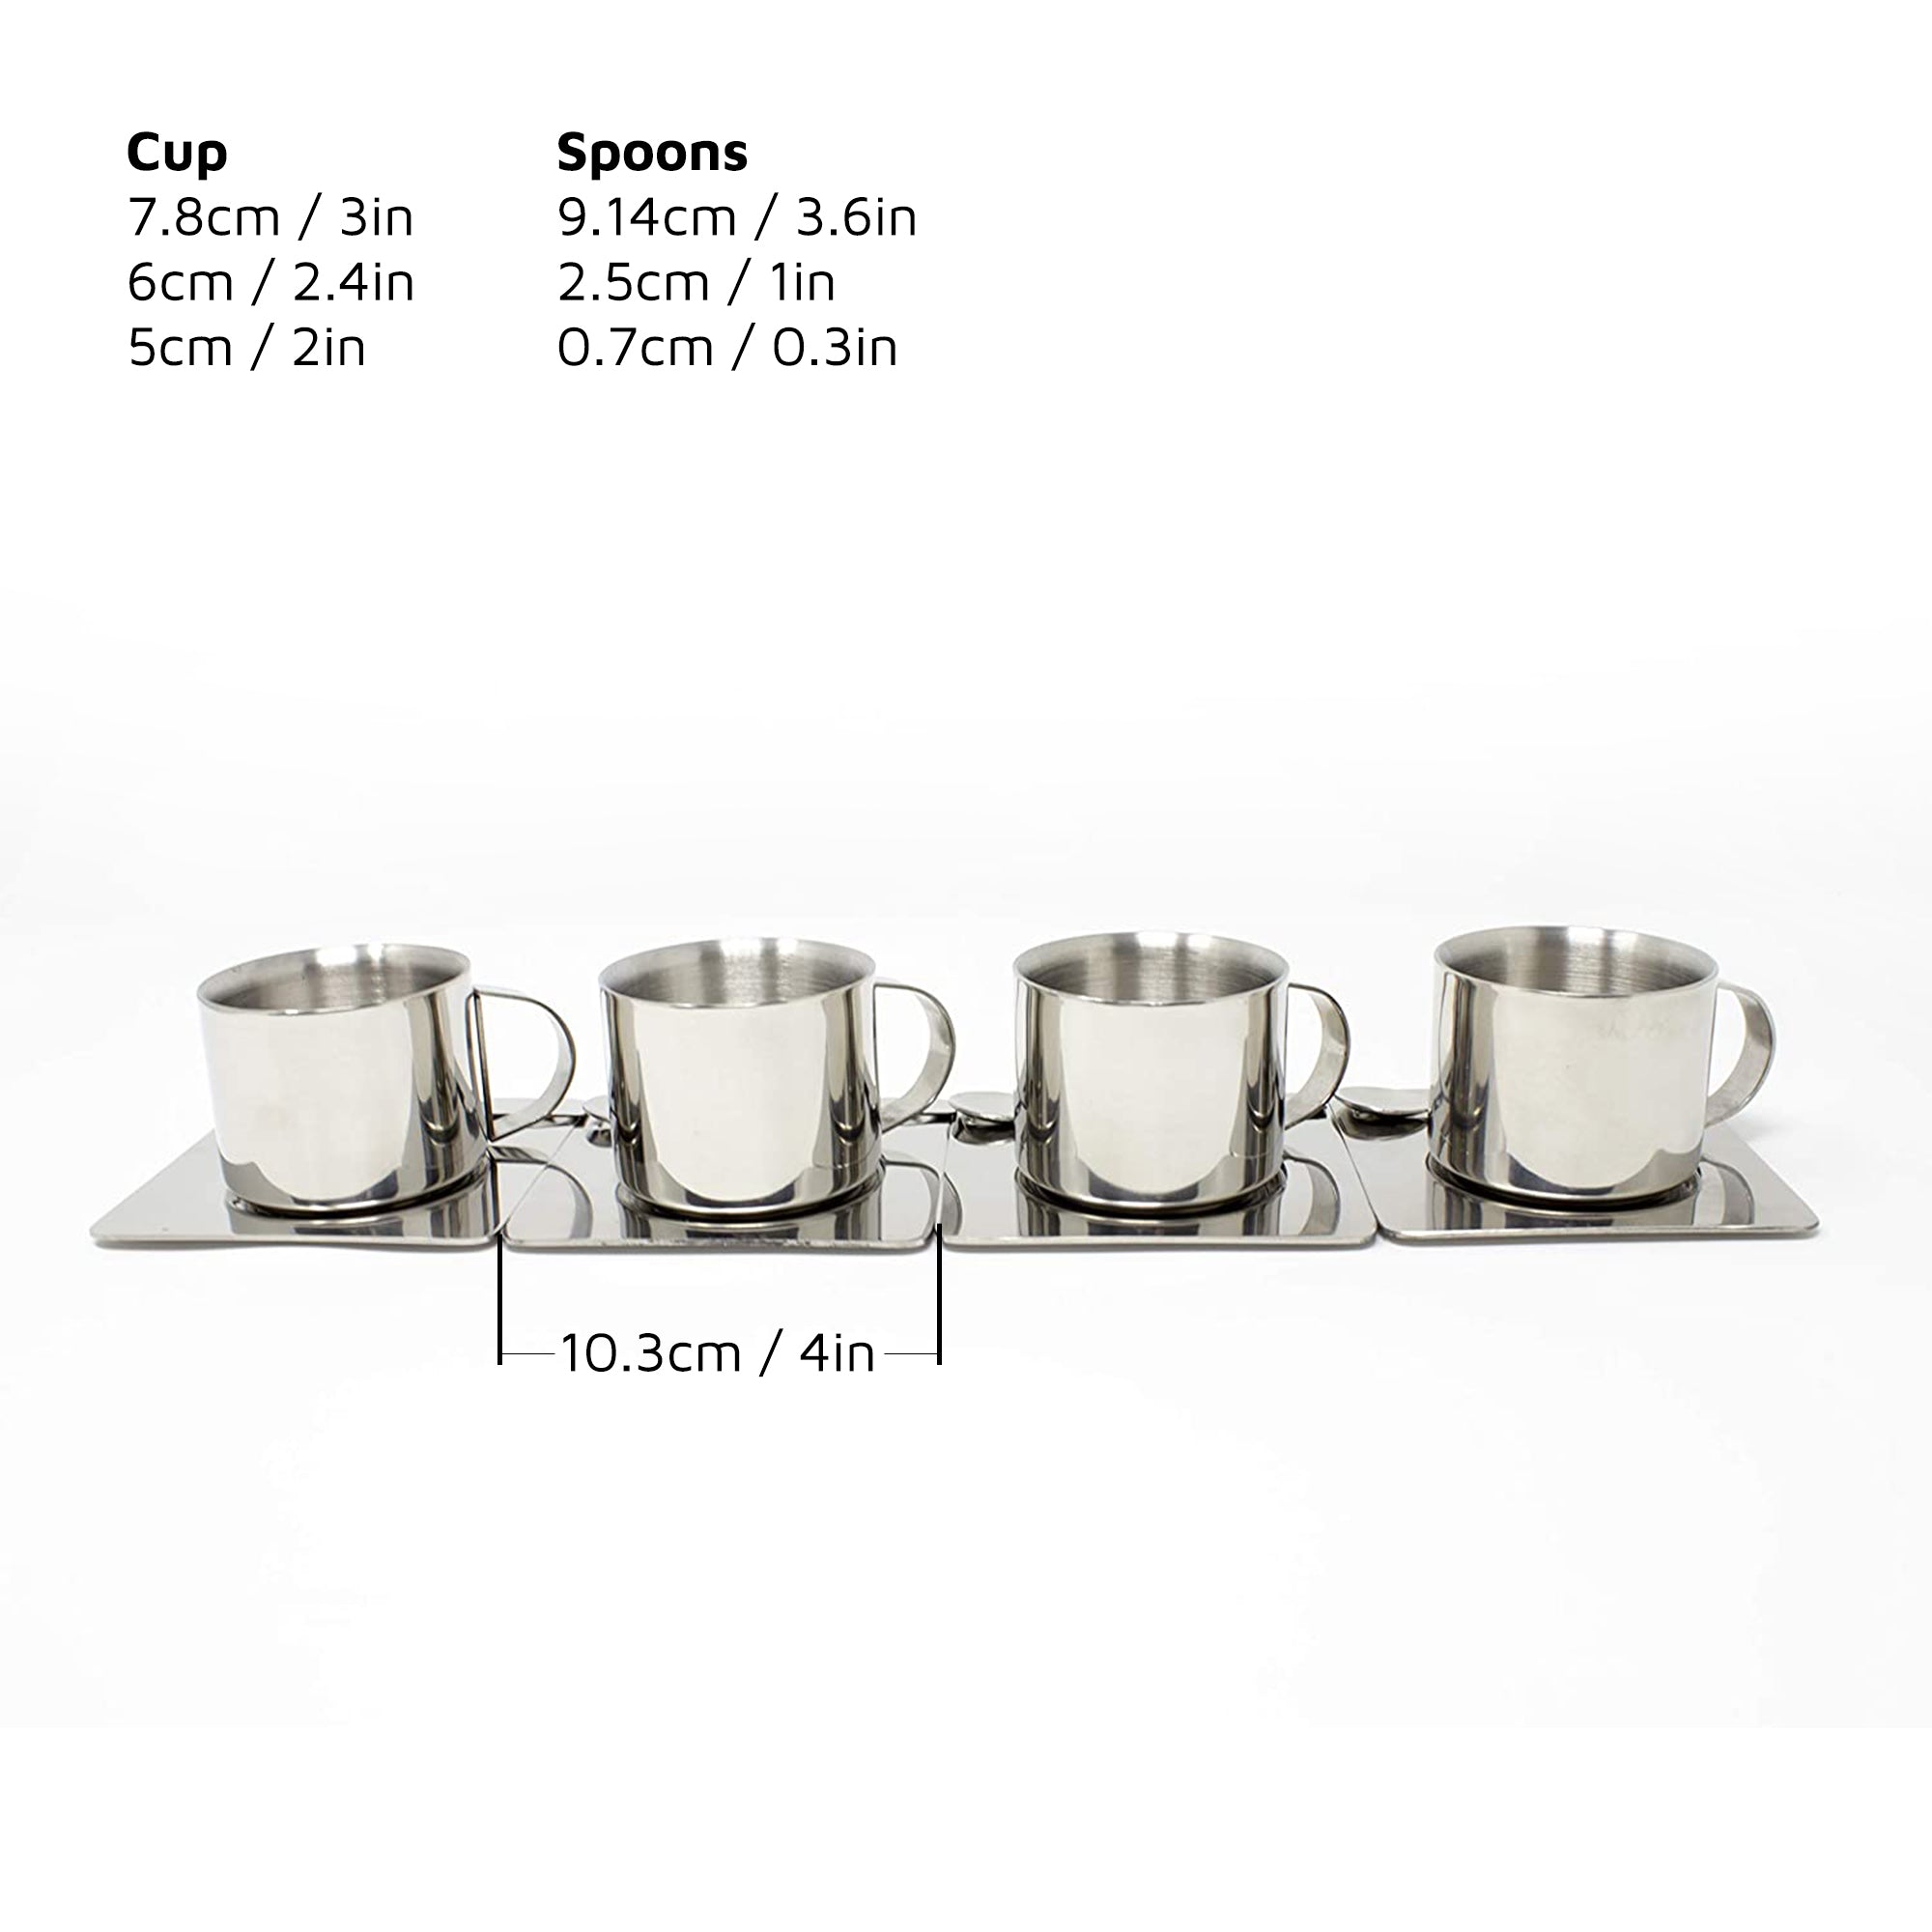 Espresso Cups with Saucers & Spoons - Set of 4